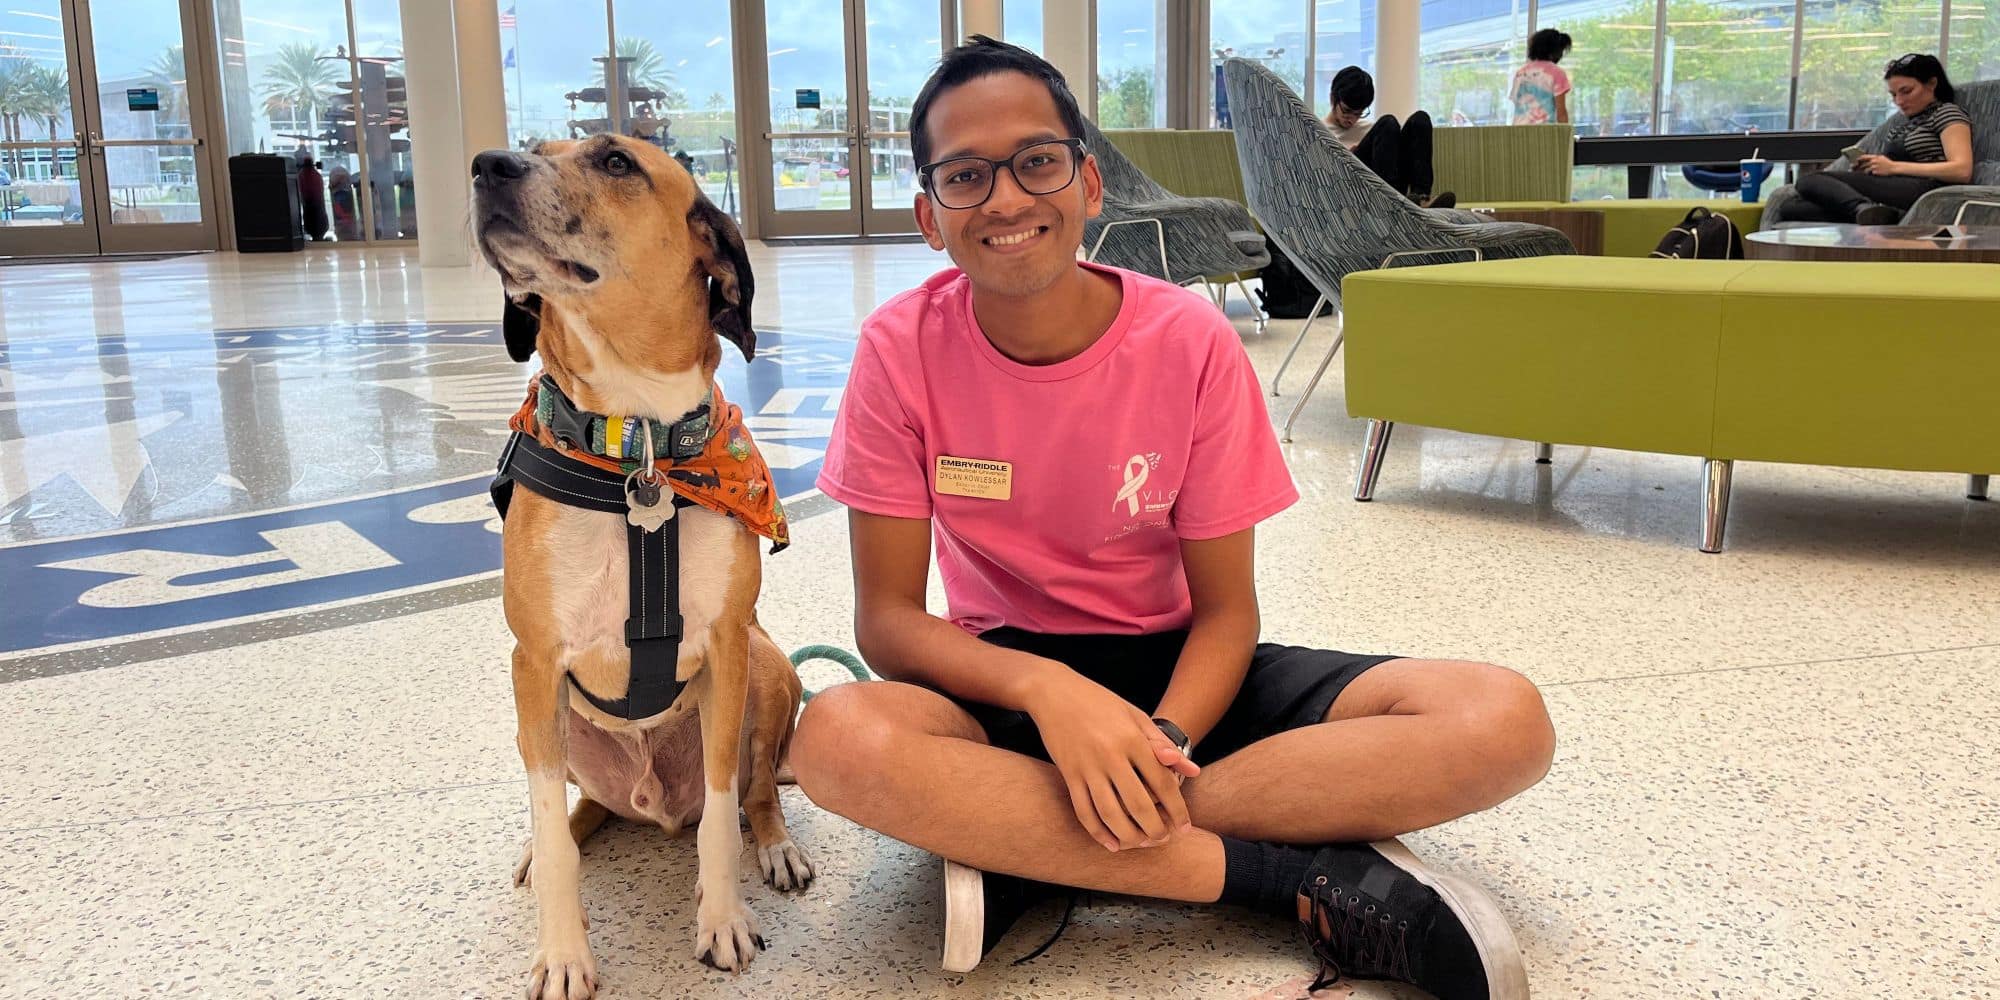 Dylan Kowlessar hangs out with his friend's dog Shadow in the Student Union in Fall 2022 (Photo: Dylan Kowlessar)